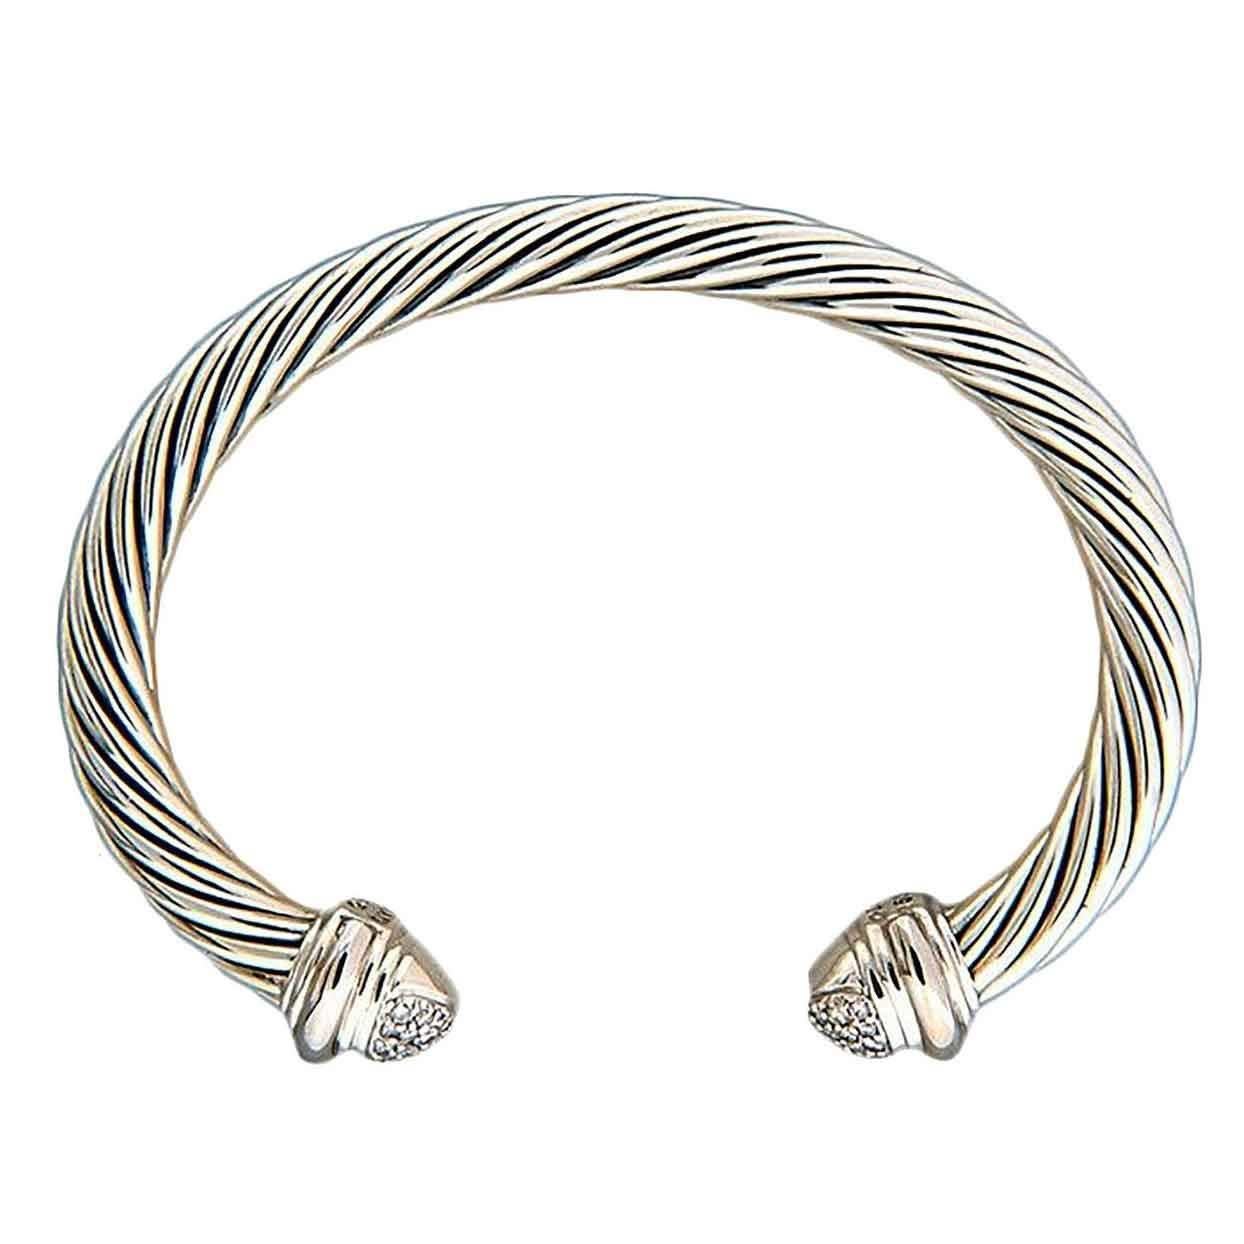 David Yurman 7mm silver cable bracelet with 18k white gold diamond end caps.

40 full cut diamonds, approx. total weight .55cts, H, SI1
18k white gold caps
Silver
43.26 grams
7mm silver cable bracelet
Stamped: D Yurman 750 925
Oval shape 2.55 x 1.7